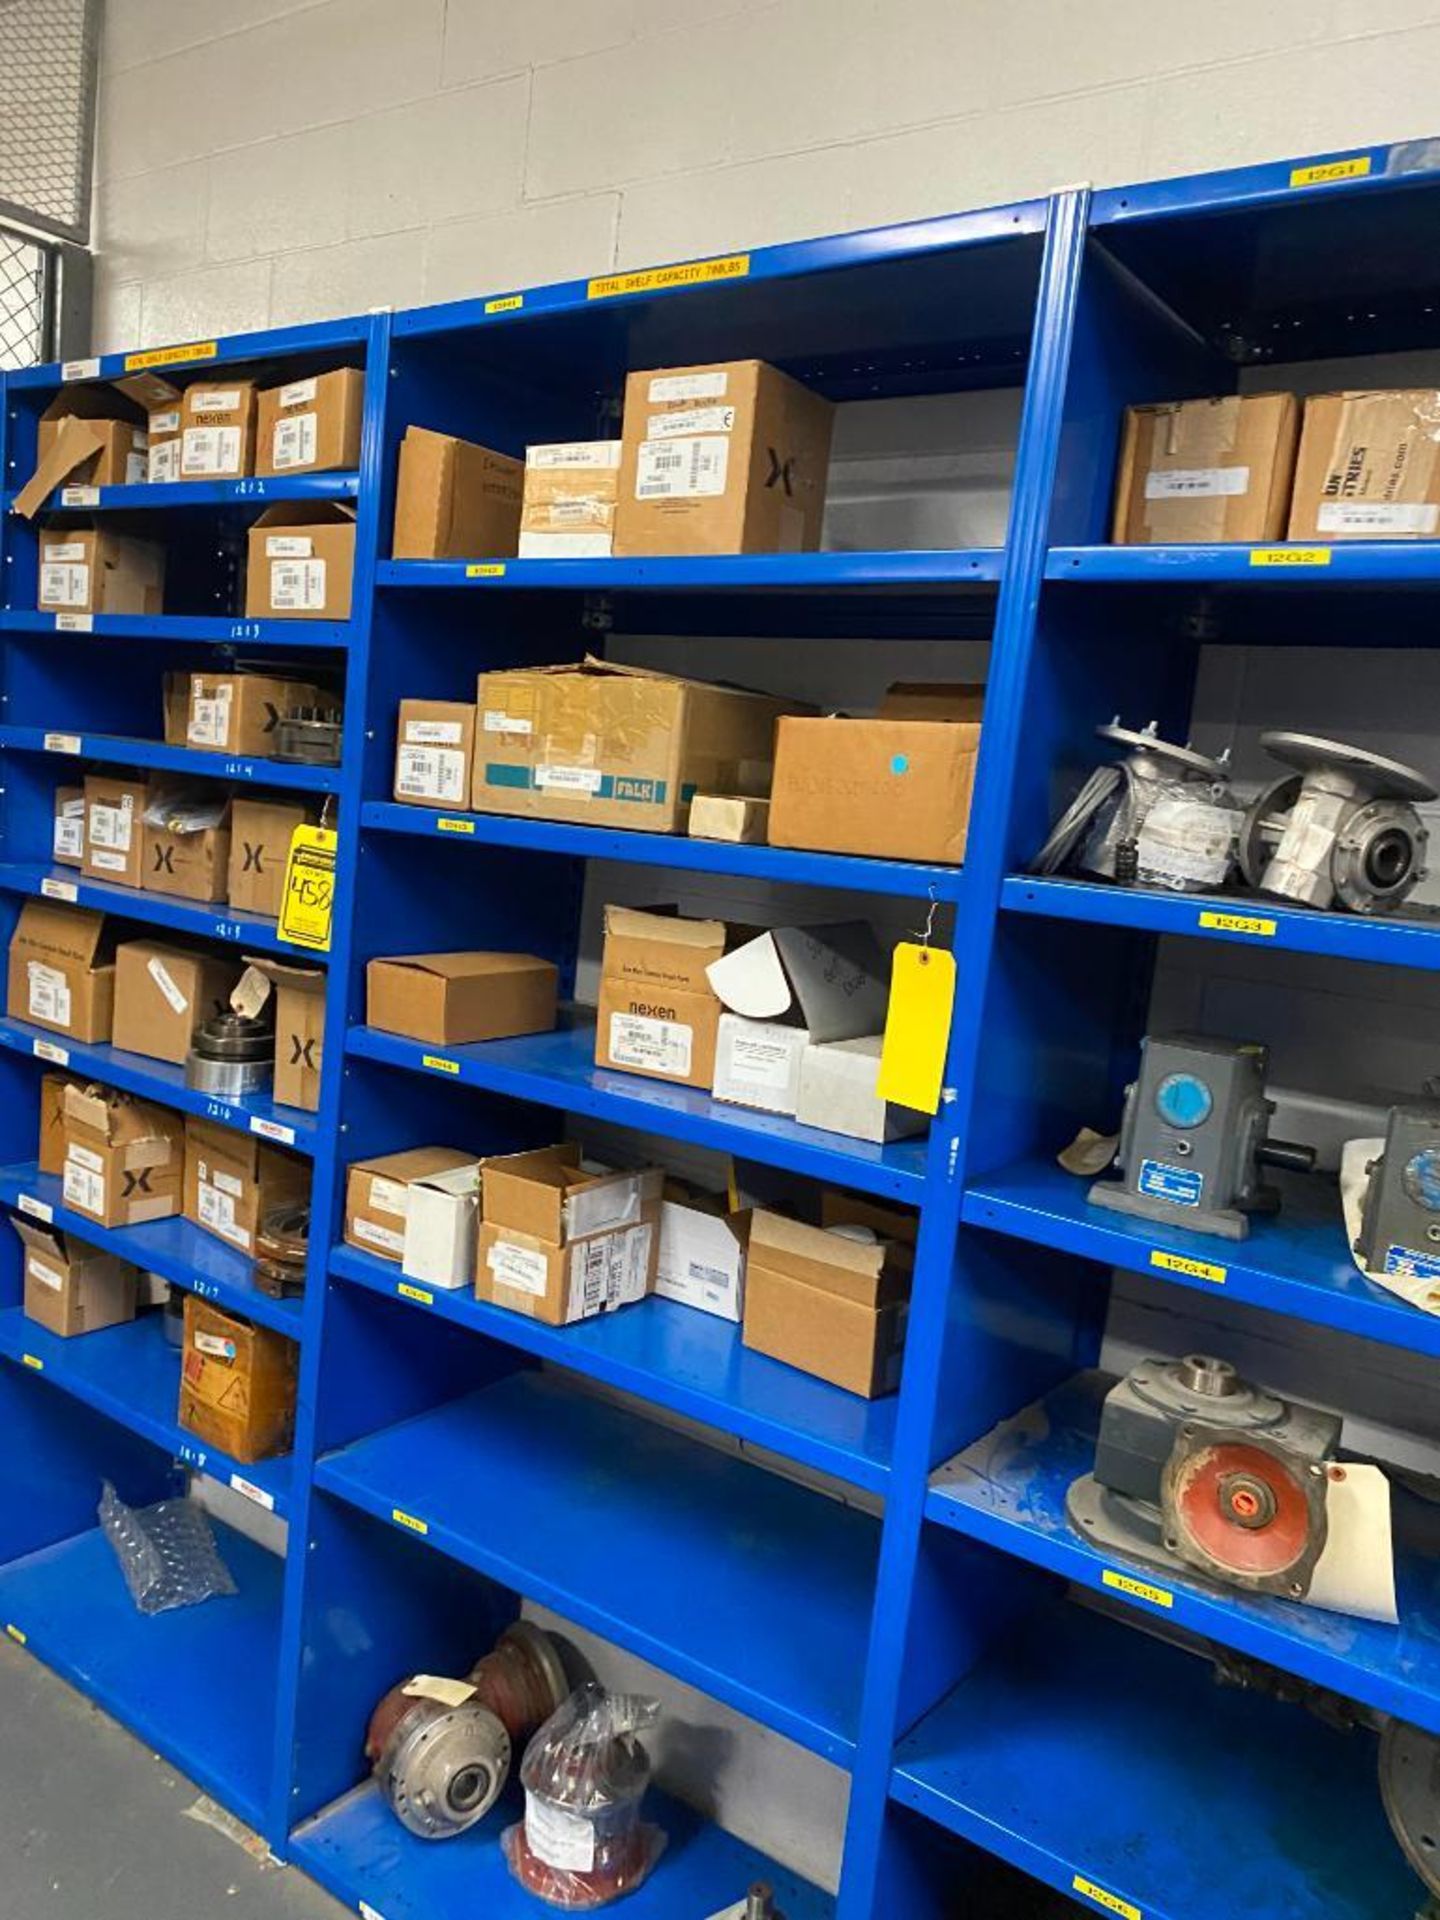 (3) Sections of Shelving & Contents of Gearboxes, Bearings, & Fly Wheels